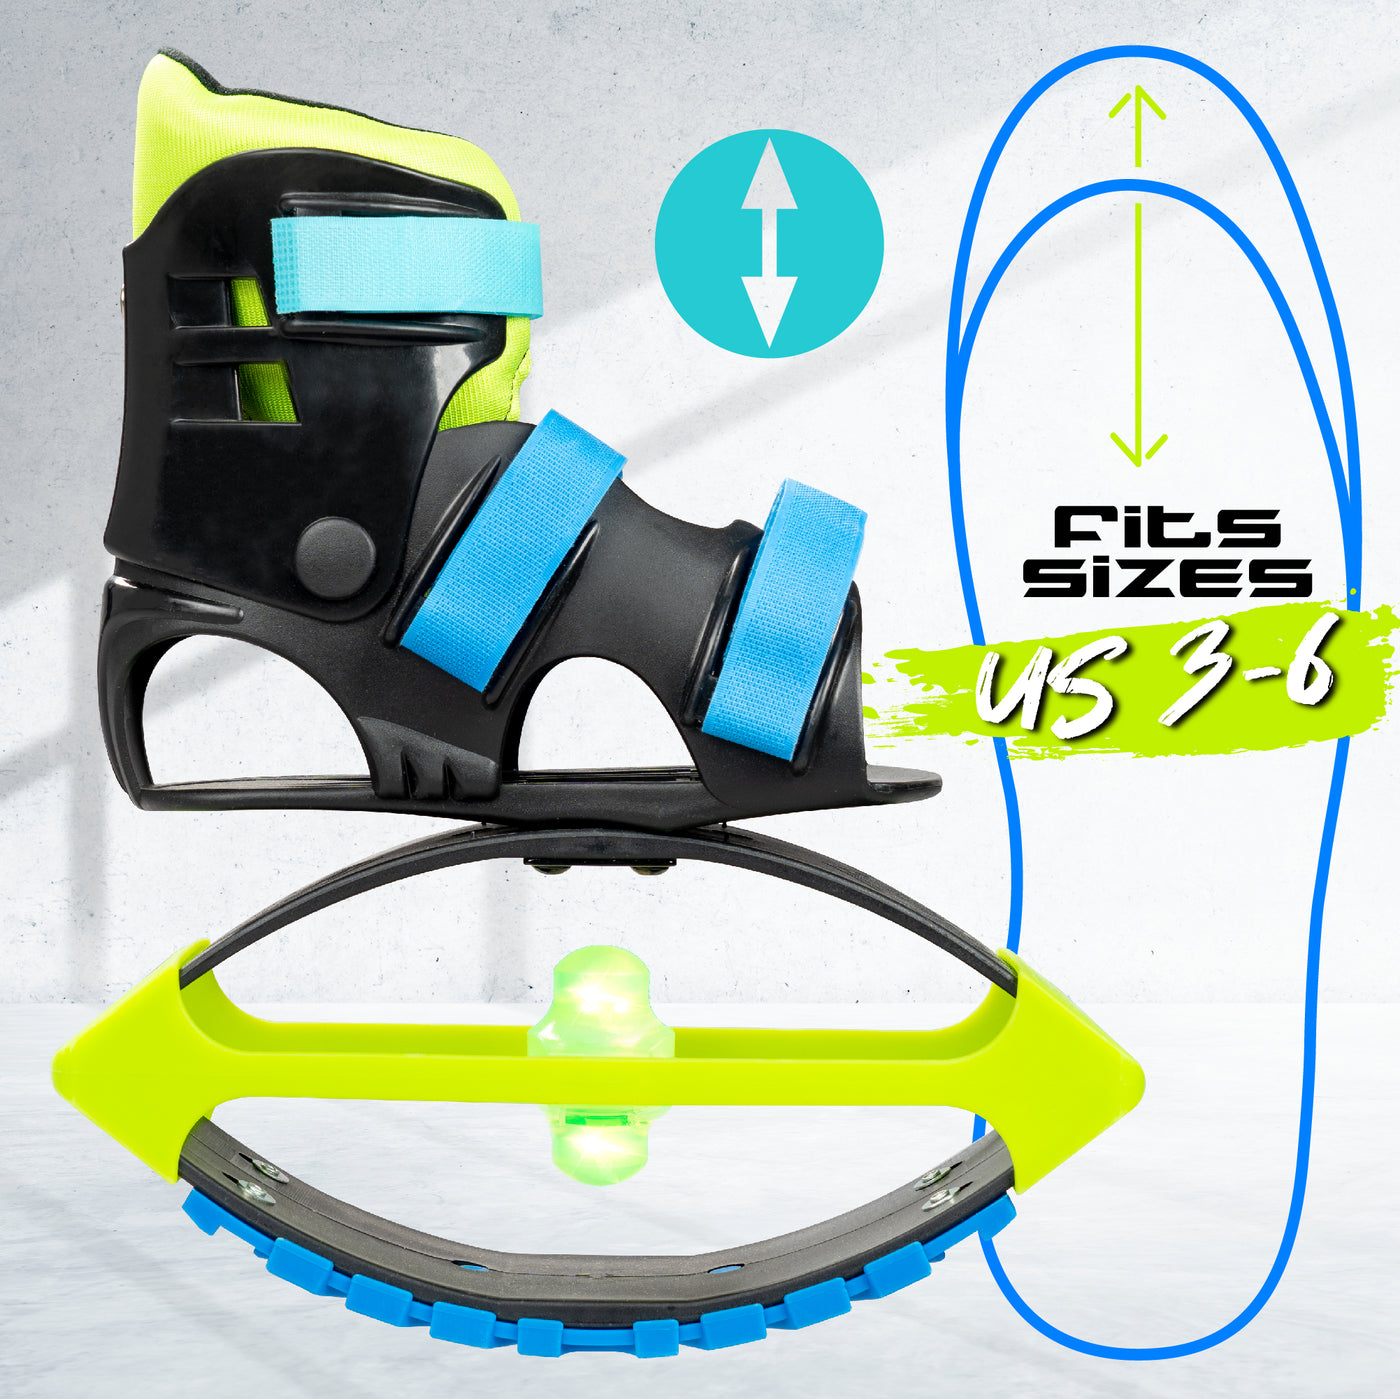 Madd Light-Up Boost Boots - Blue Lime – Madd Gear